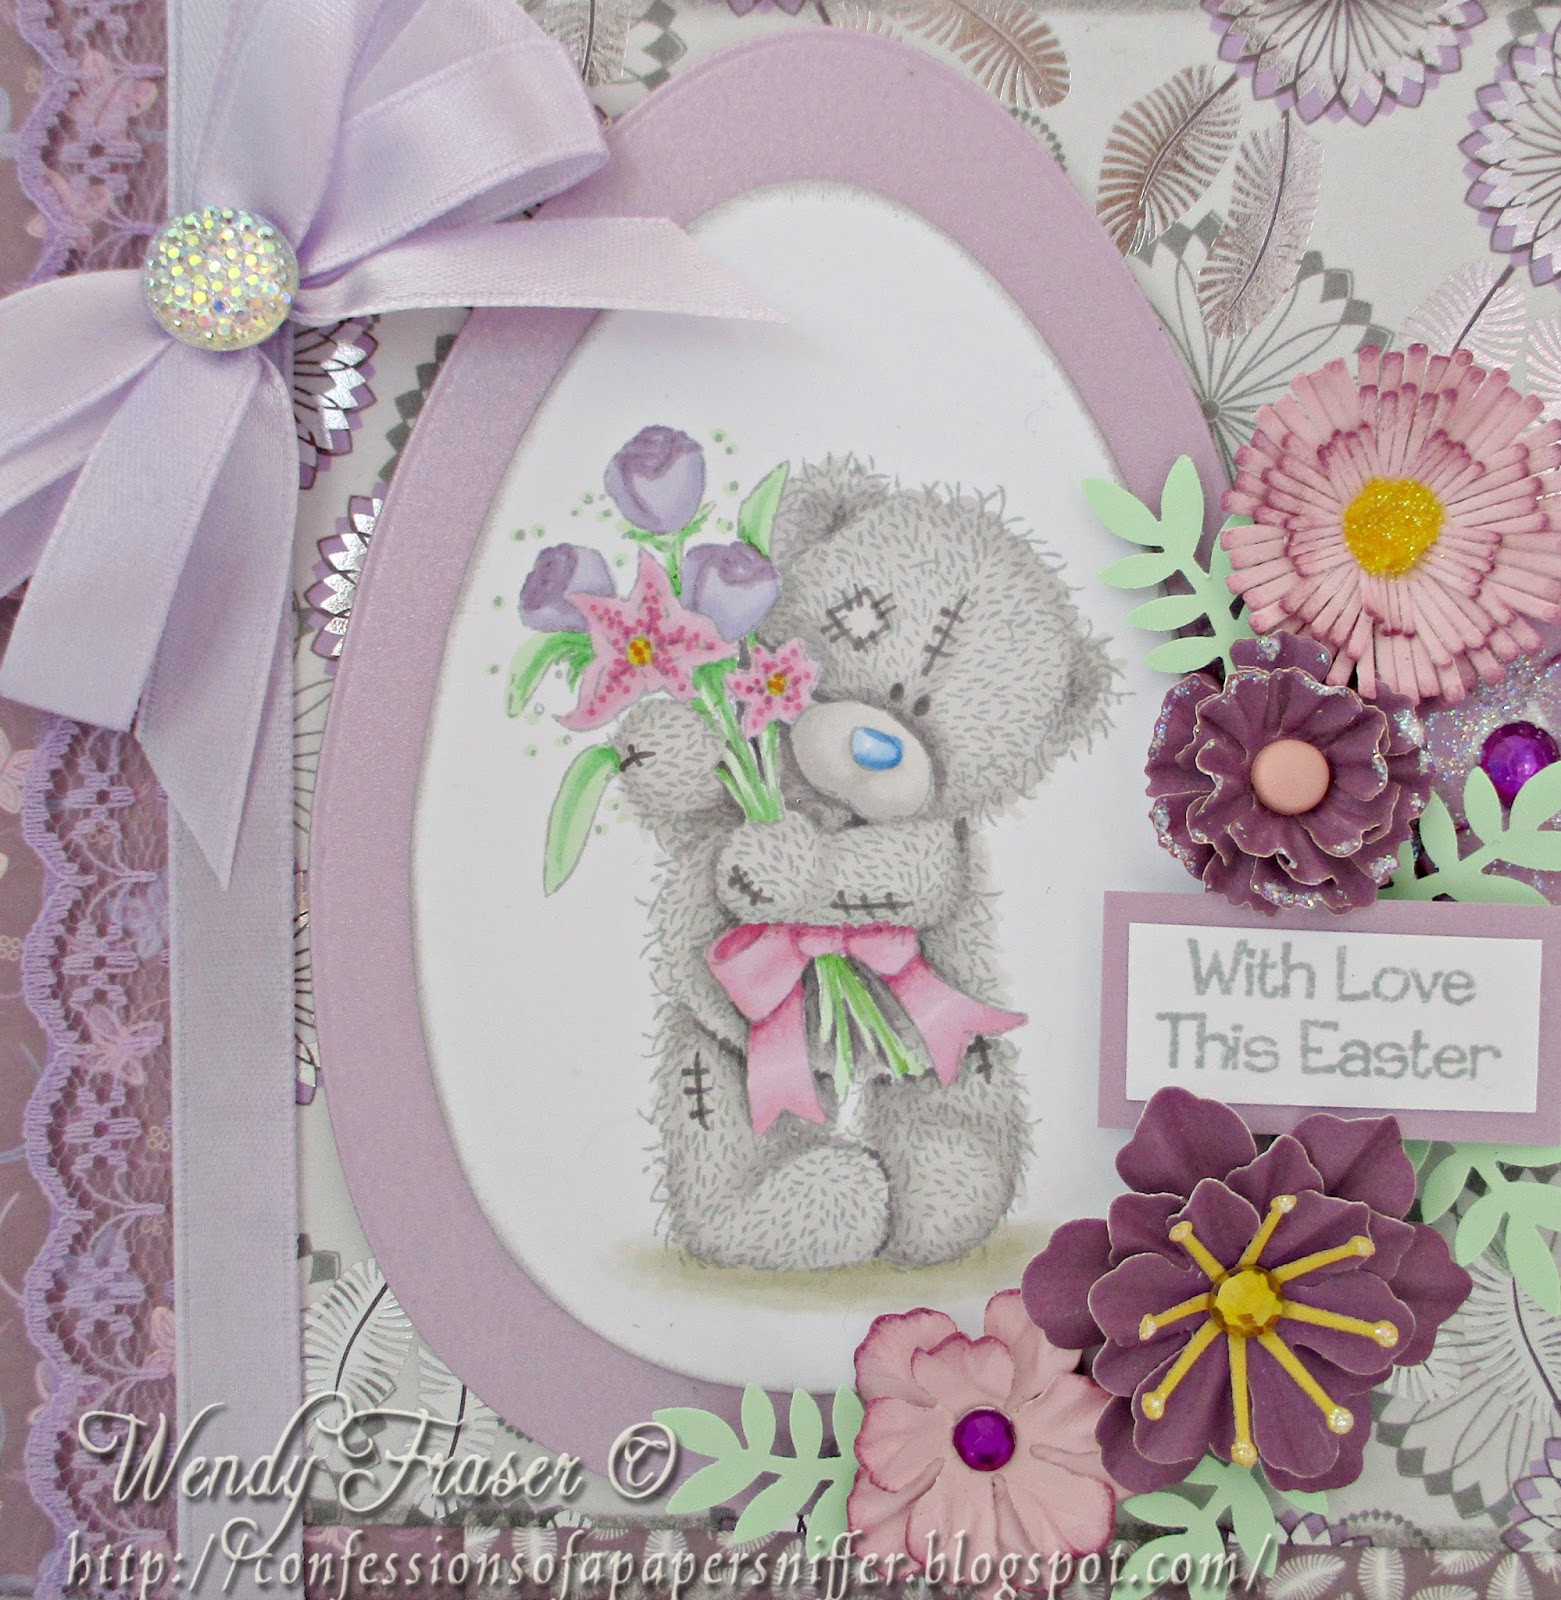 Confessions of a Papersniffer: Tatty Teddy Easter Card